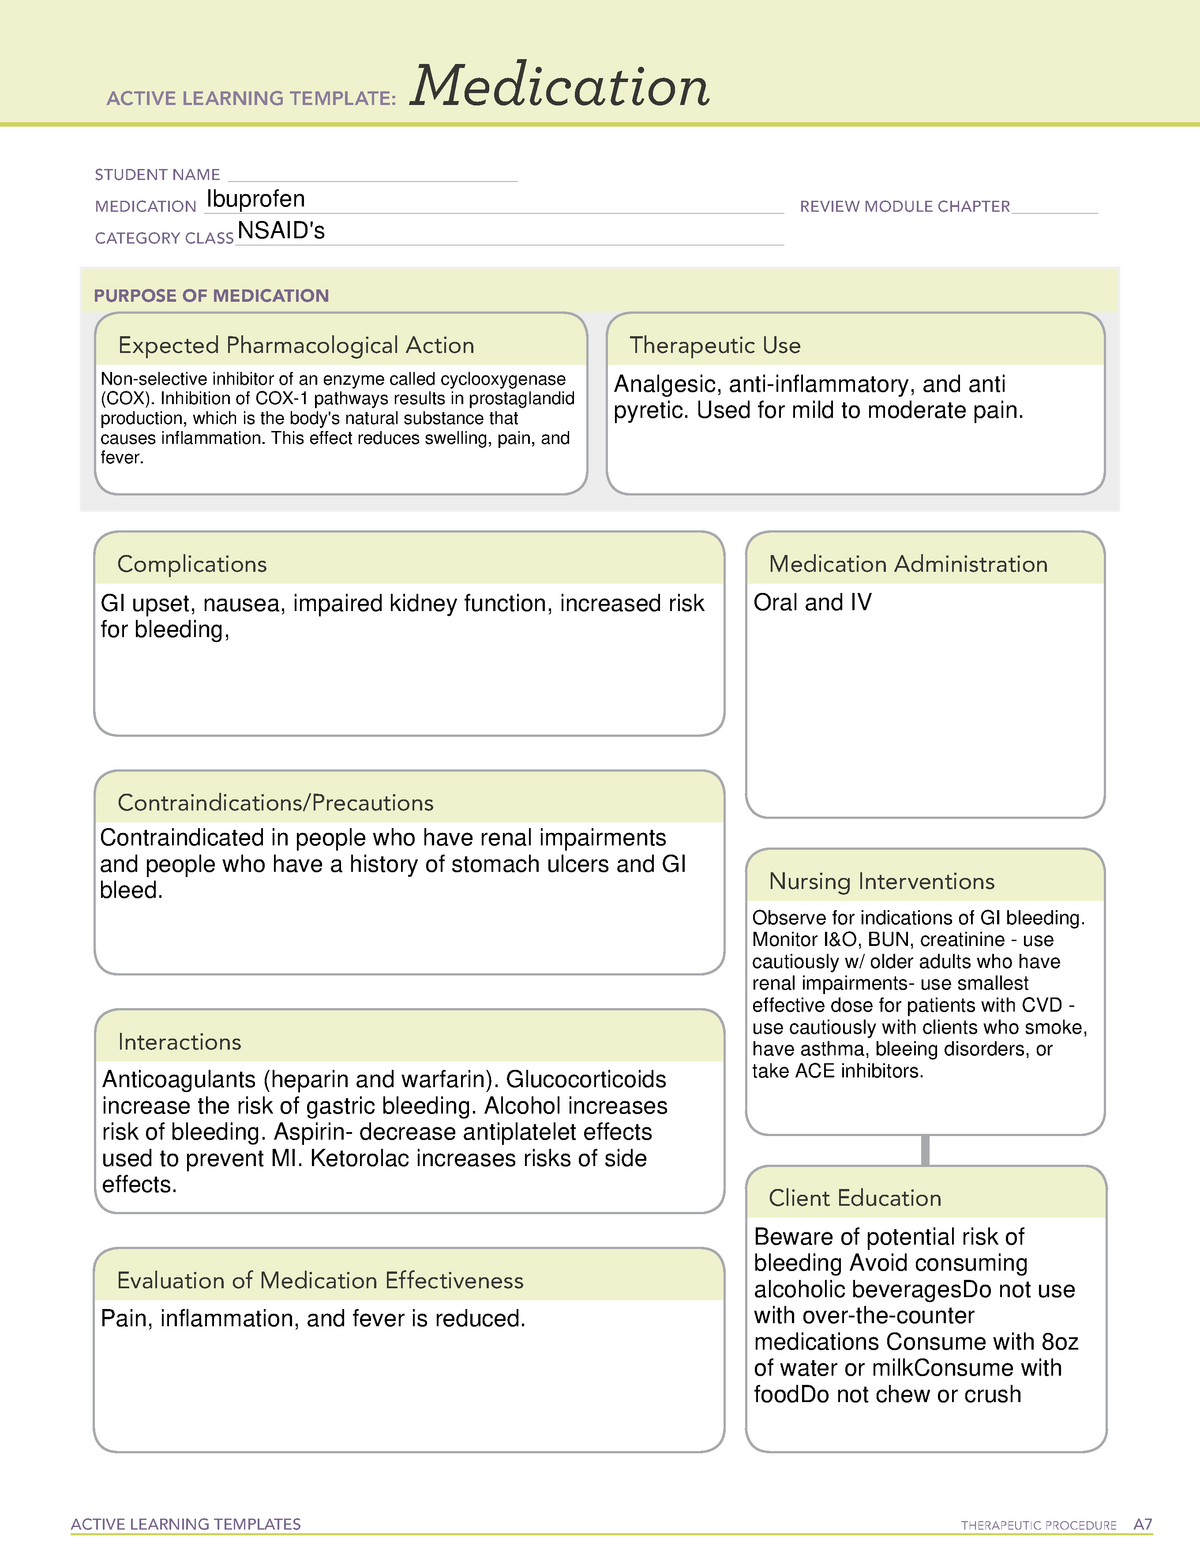 Med ALT Ibuprofen ACTIVE LEARNING TEMPLATES THERAPEUTIC PROCEDURE A